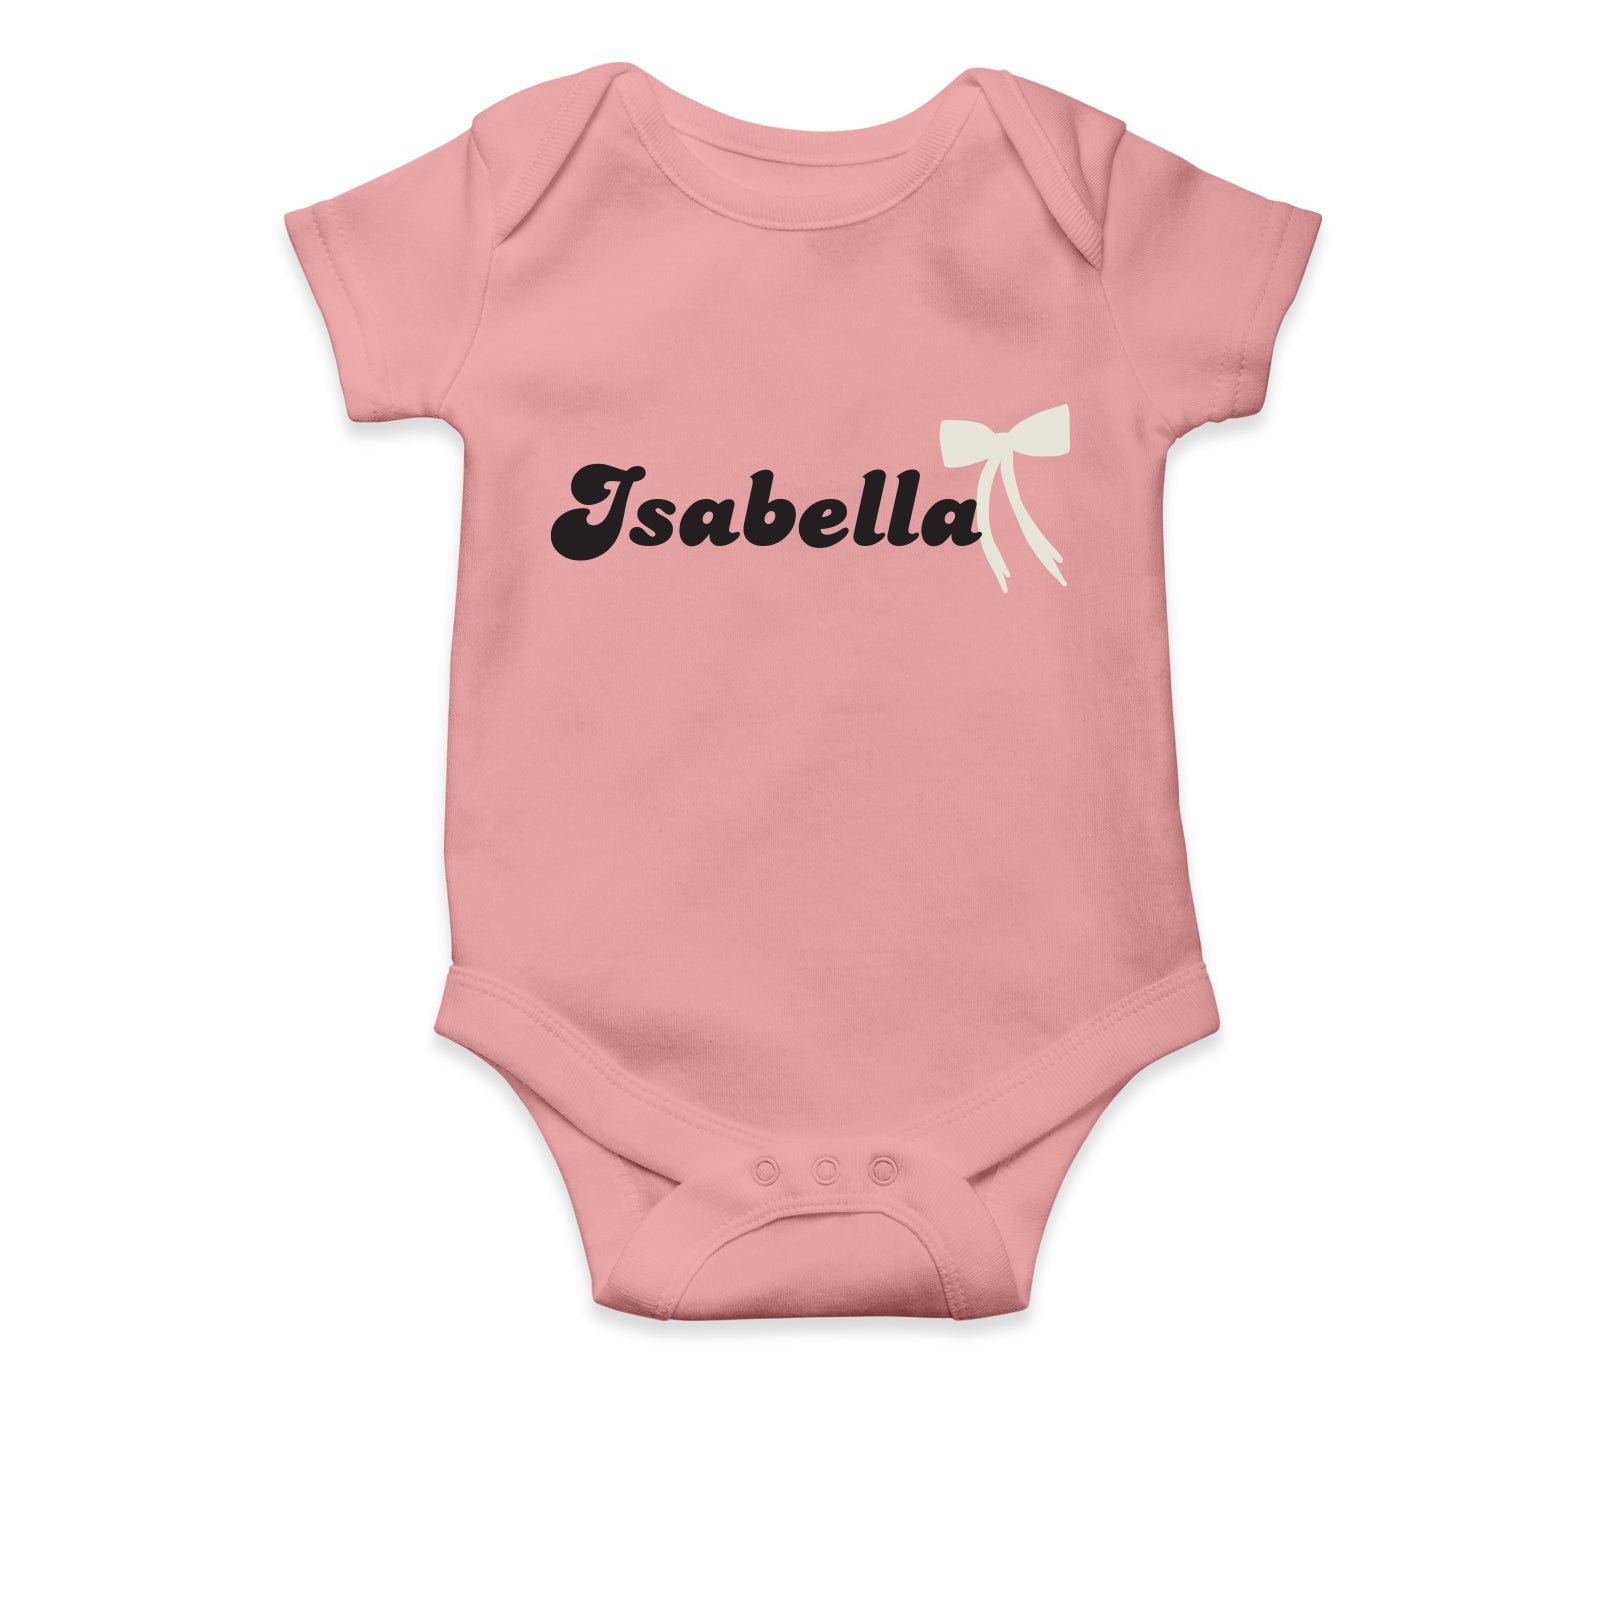 Personalised White Baby Body Suit Grow Vest - Gift for New Mother